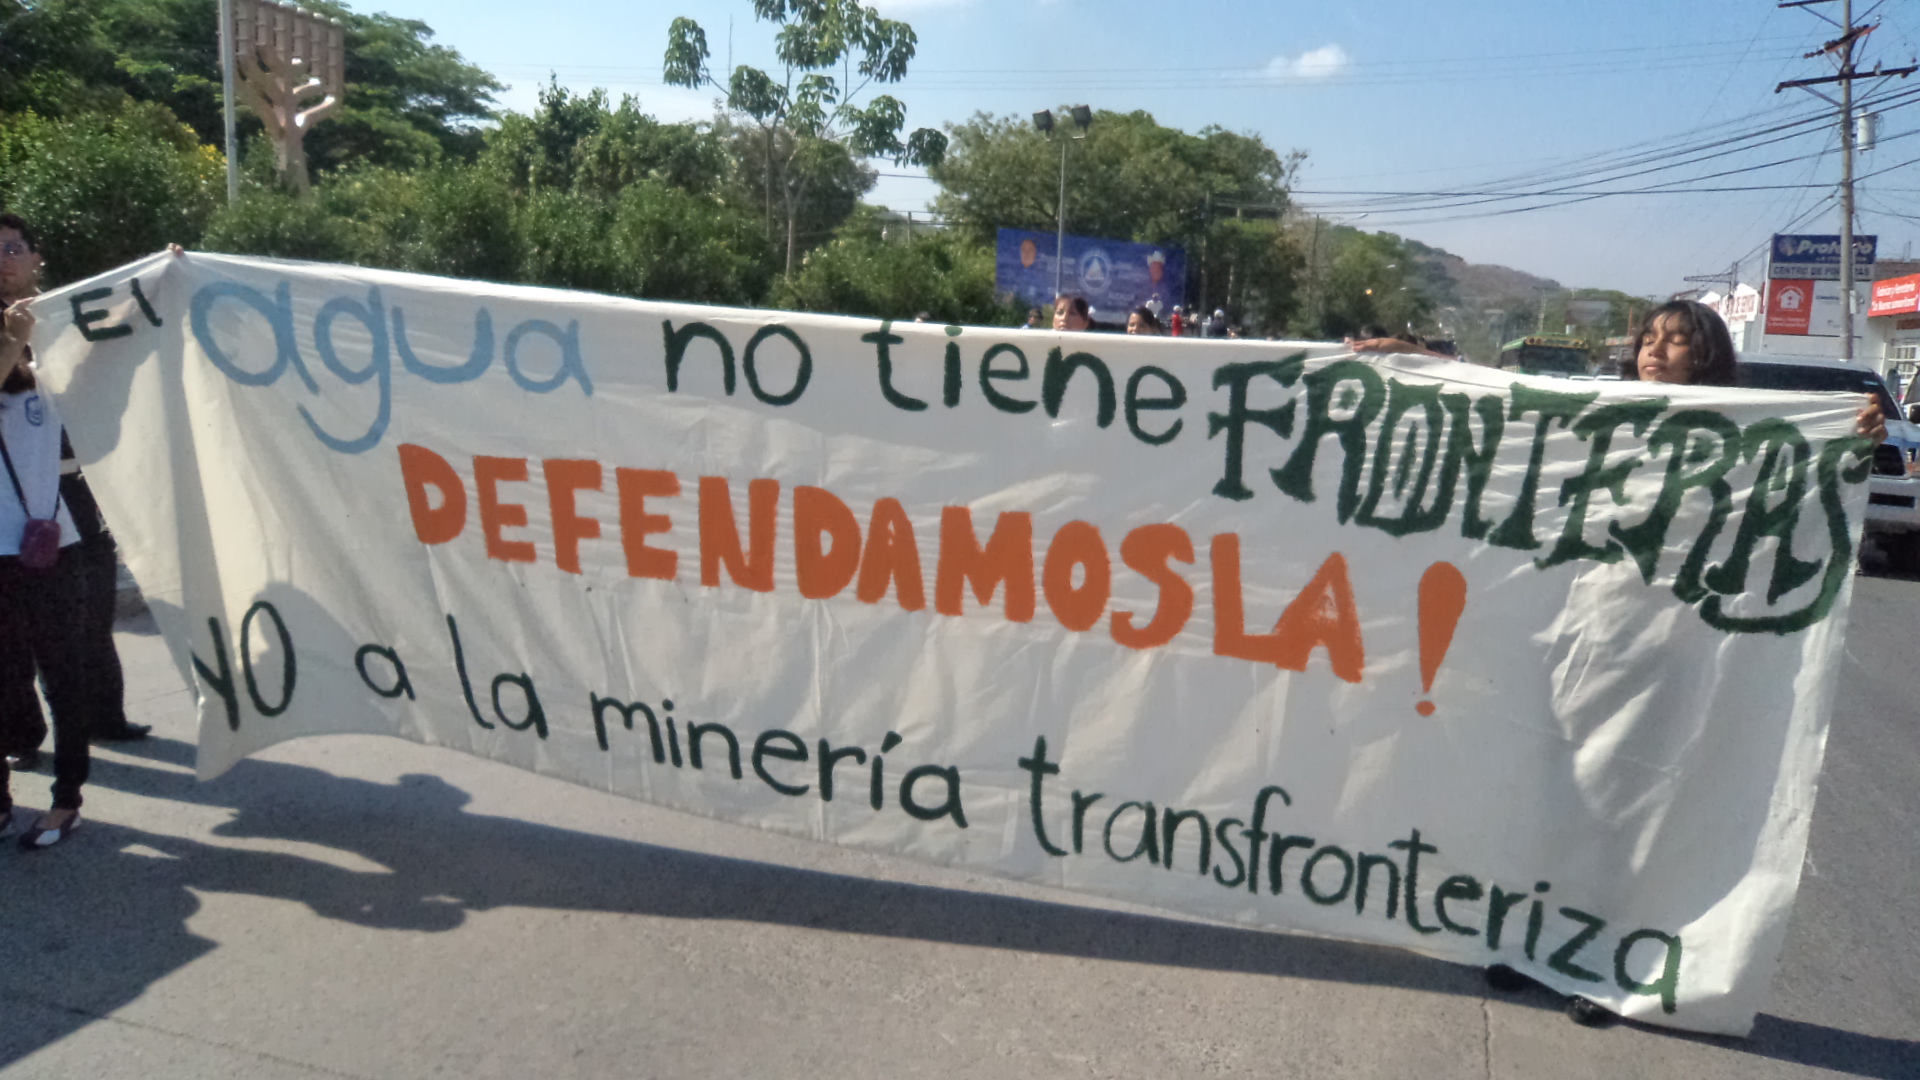 Mujeres Ambientalistas participates in a protest against the transfrontier mines in Metapan and Jutiapa (Guatemala)